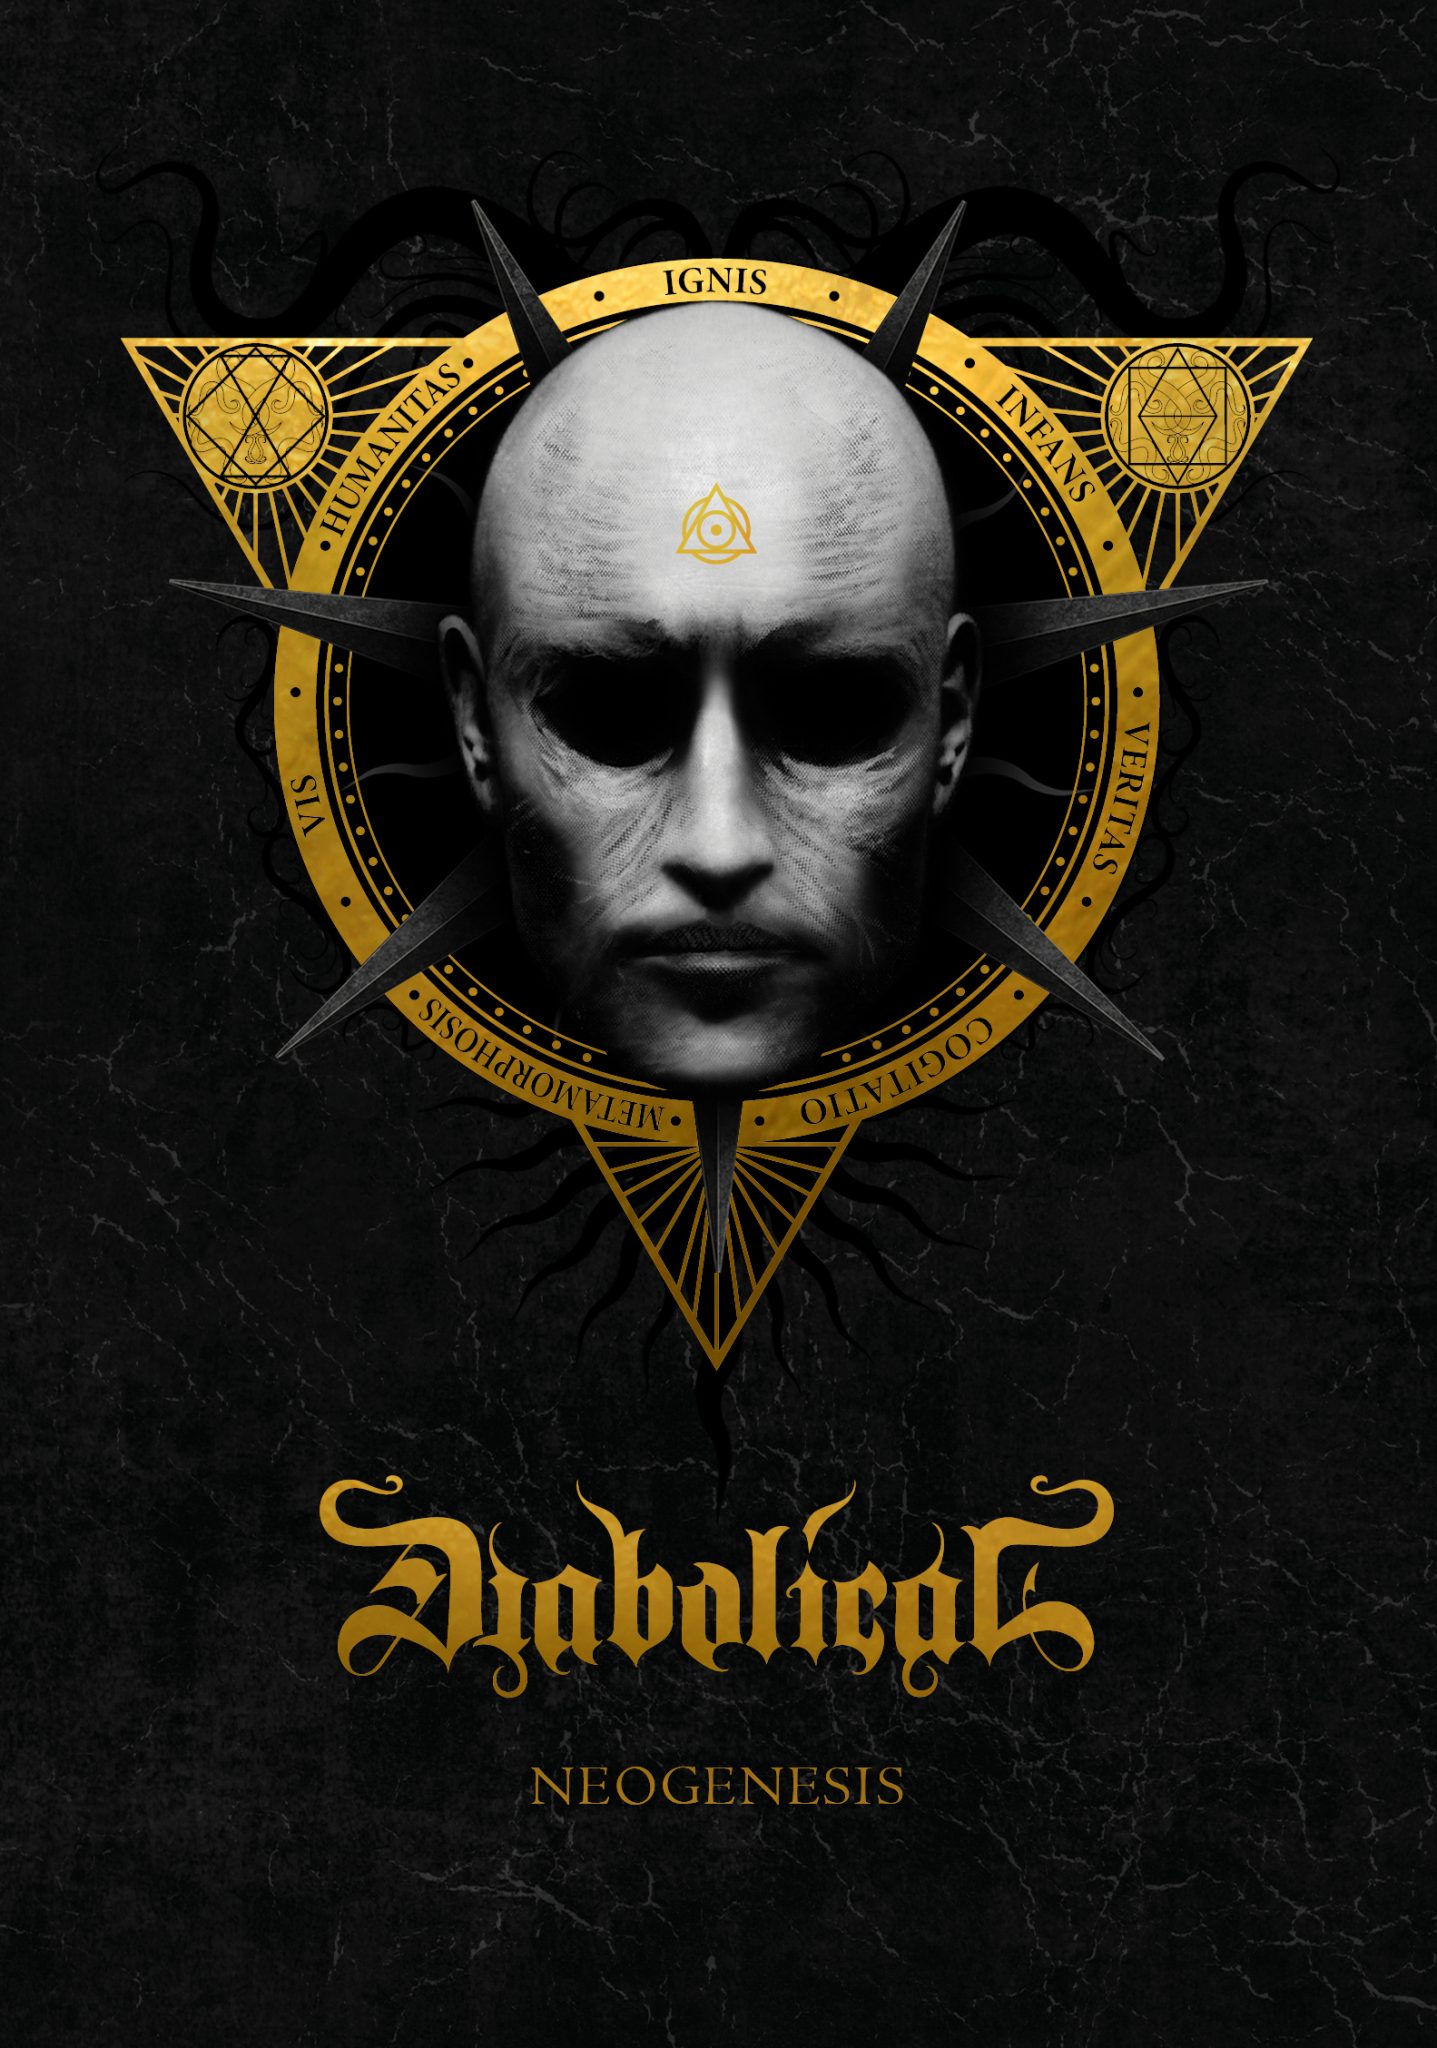 News Added Aug 13, 2013 NEOGENESIS is the new album by the Swedish death metal band Diabolical, a concept album uniting death metal and literature. NEOGENESIS is a novel telling the post-apocalyptic story of the end of the world where each chapter is represented by a song on the album. NEOGENESIS is released as an […]